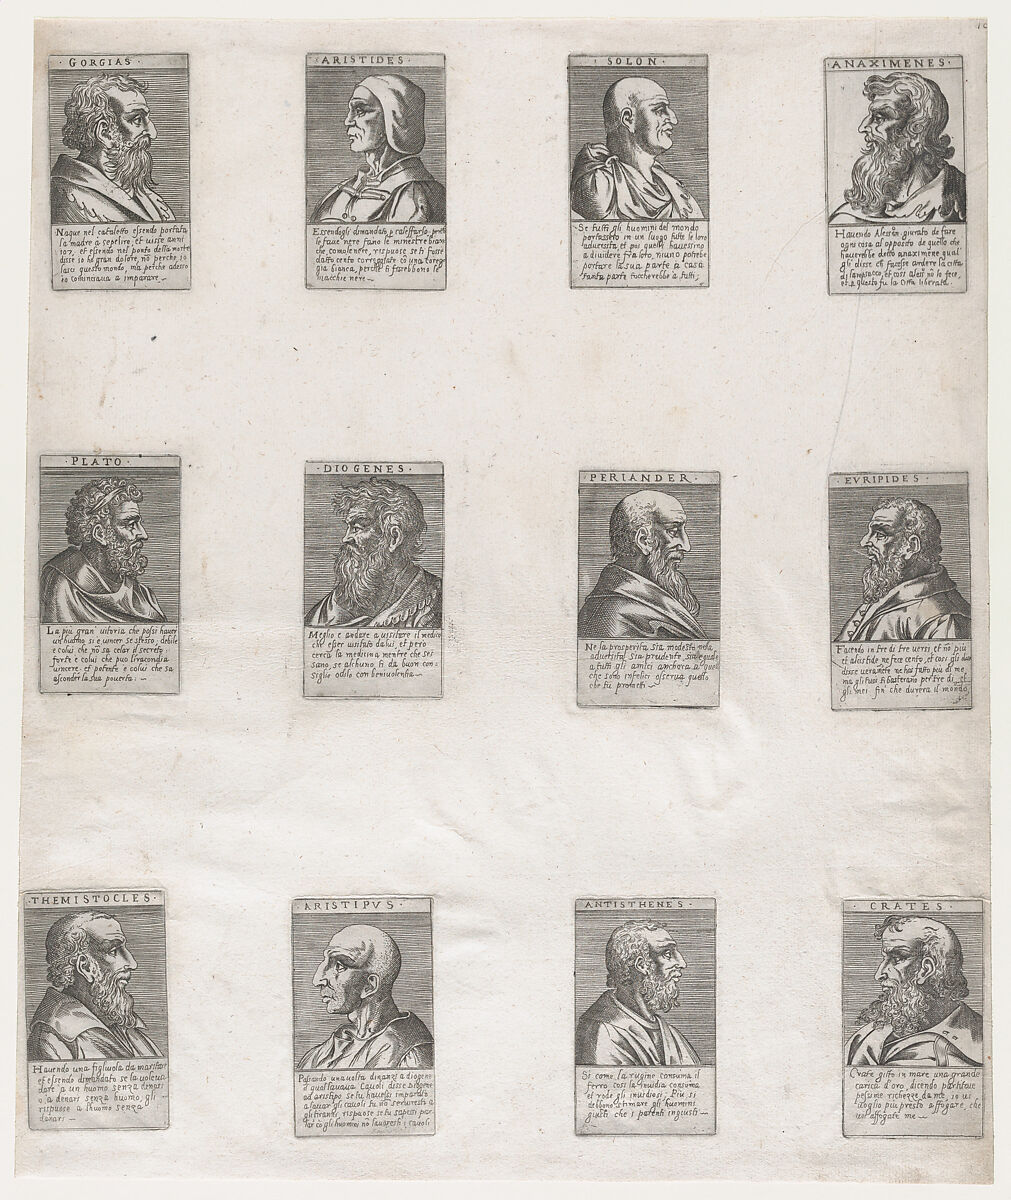 Portraits of the Ancient Philosophers, from "Speculum Romanae Magnificentiae", Anonymous, Italian, 16th century, Engraving 